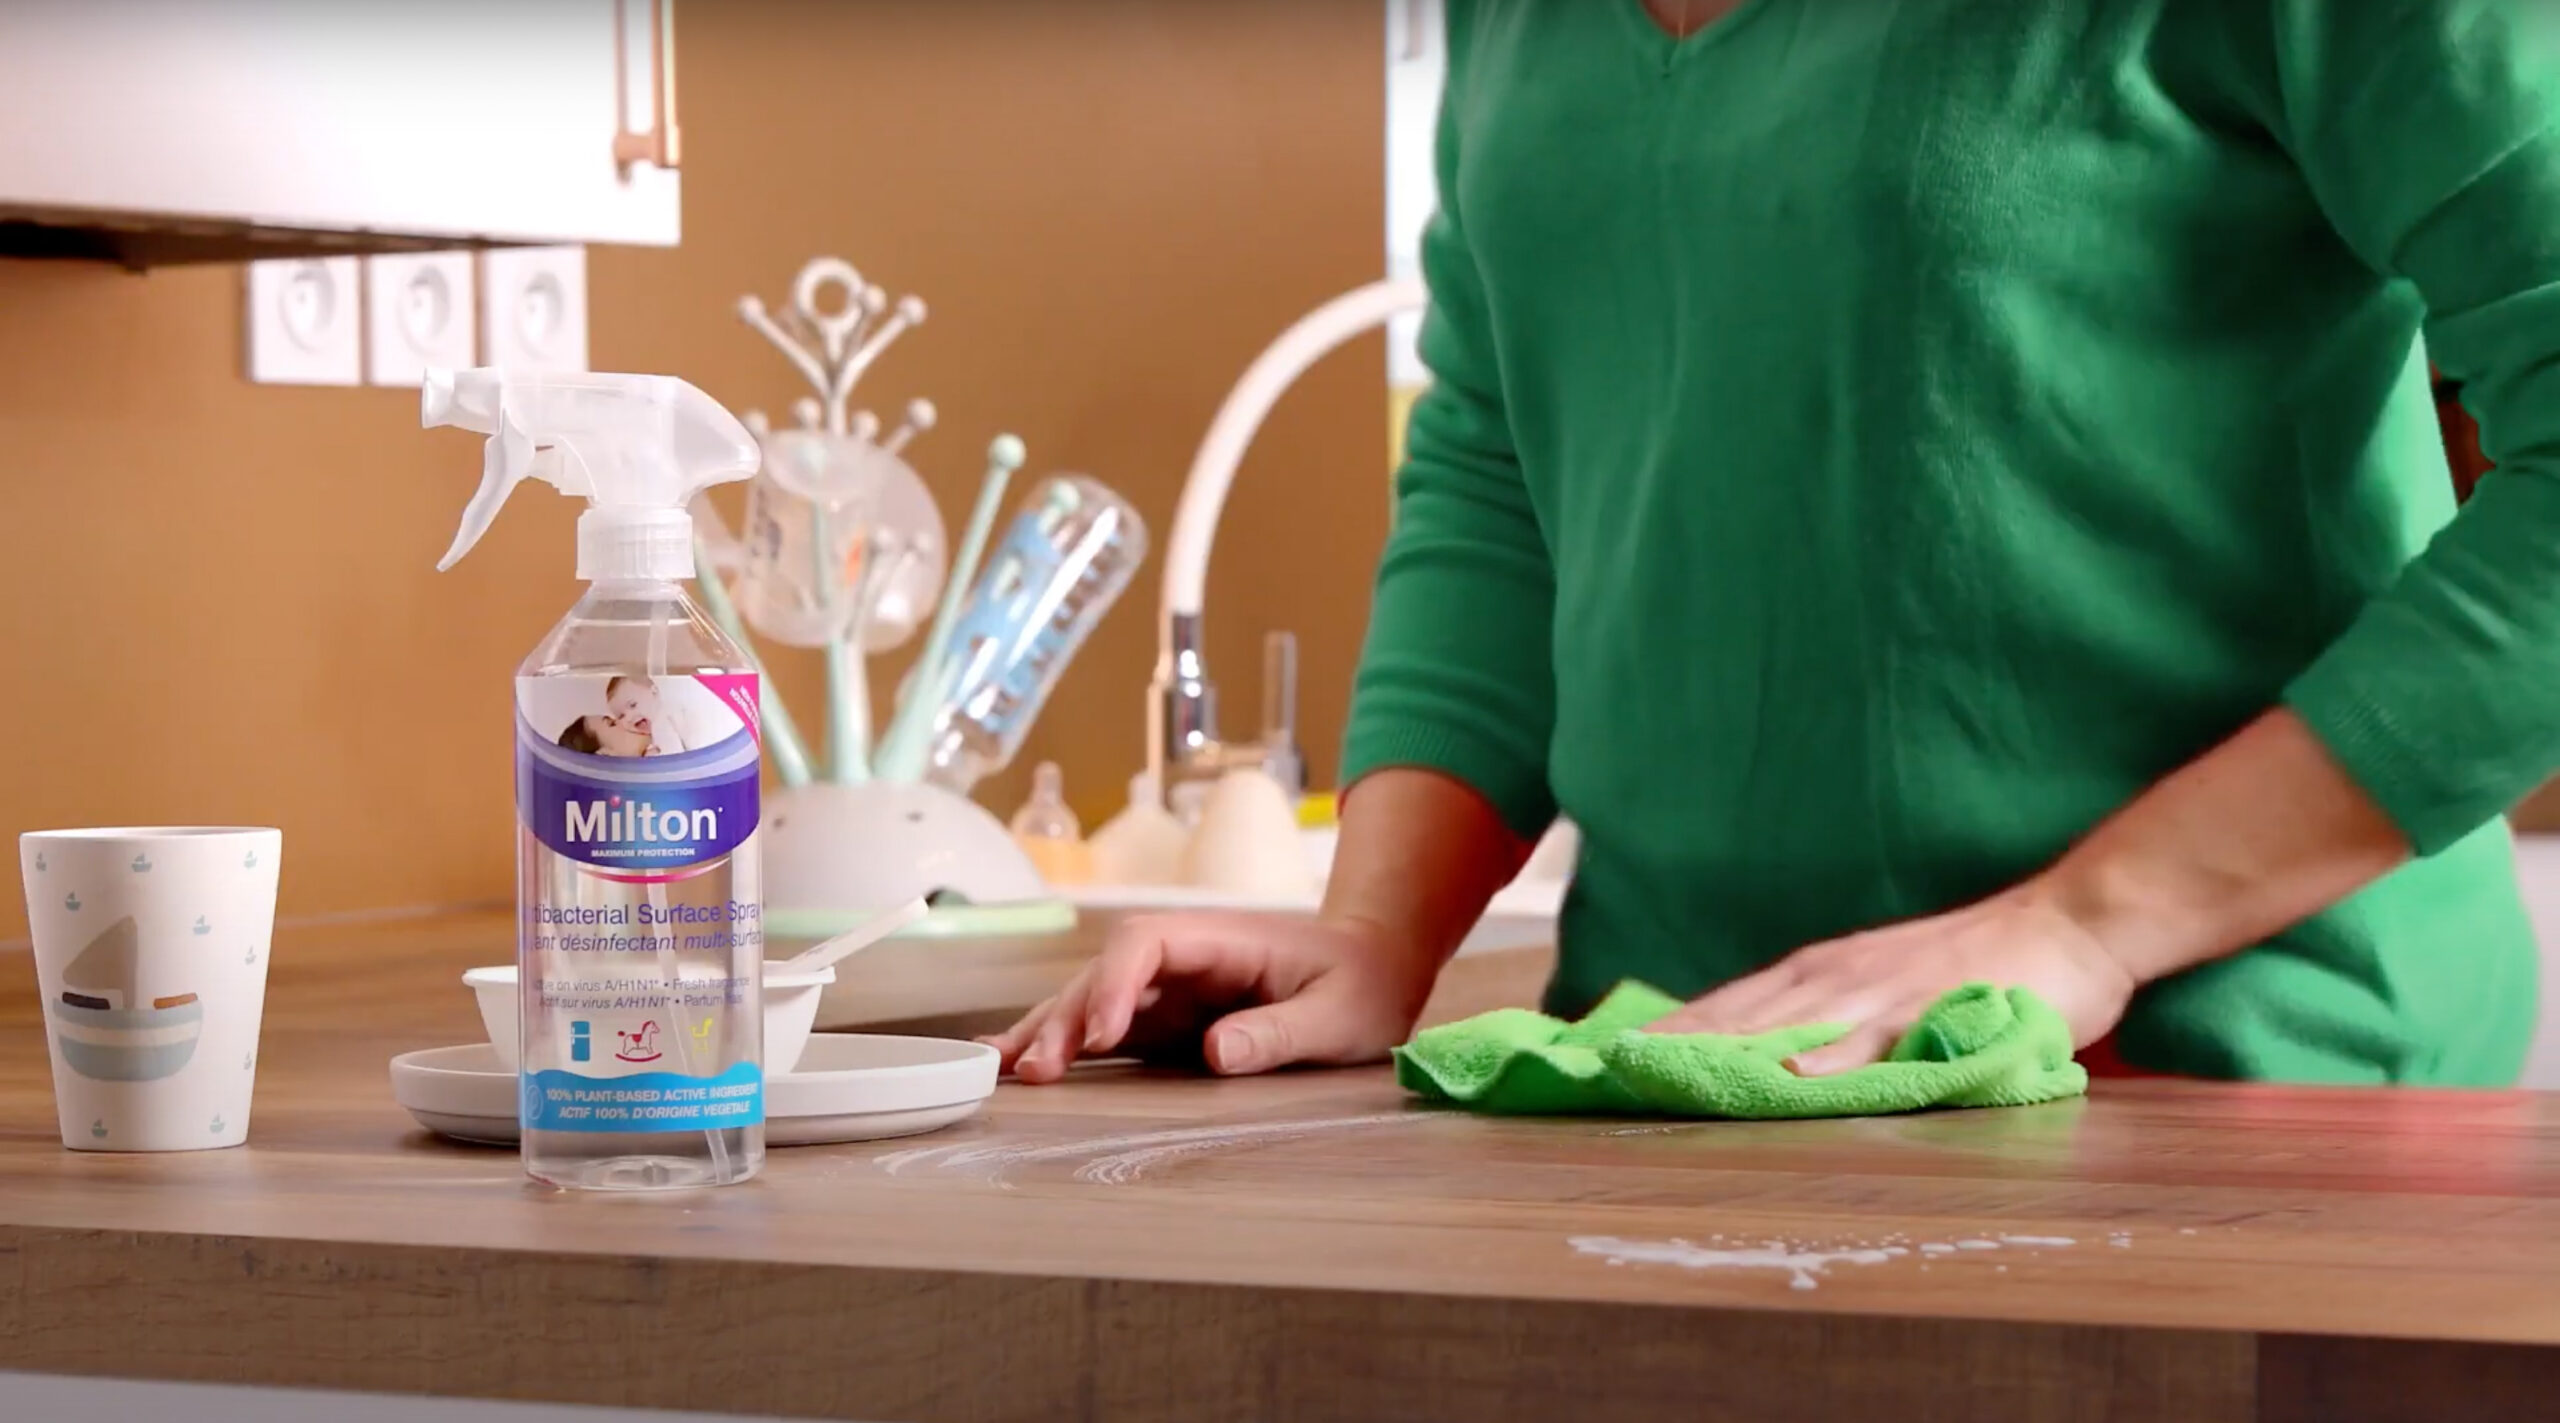 Woman cleaning kitchen counter using Milton antibacterial surface spray